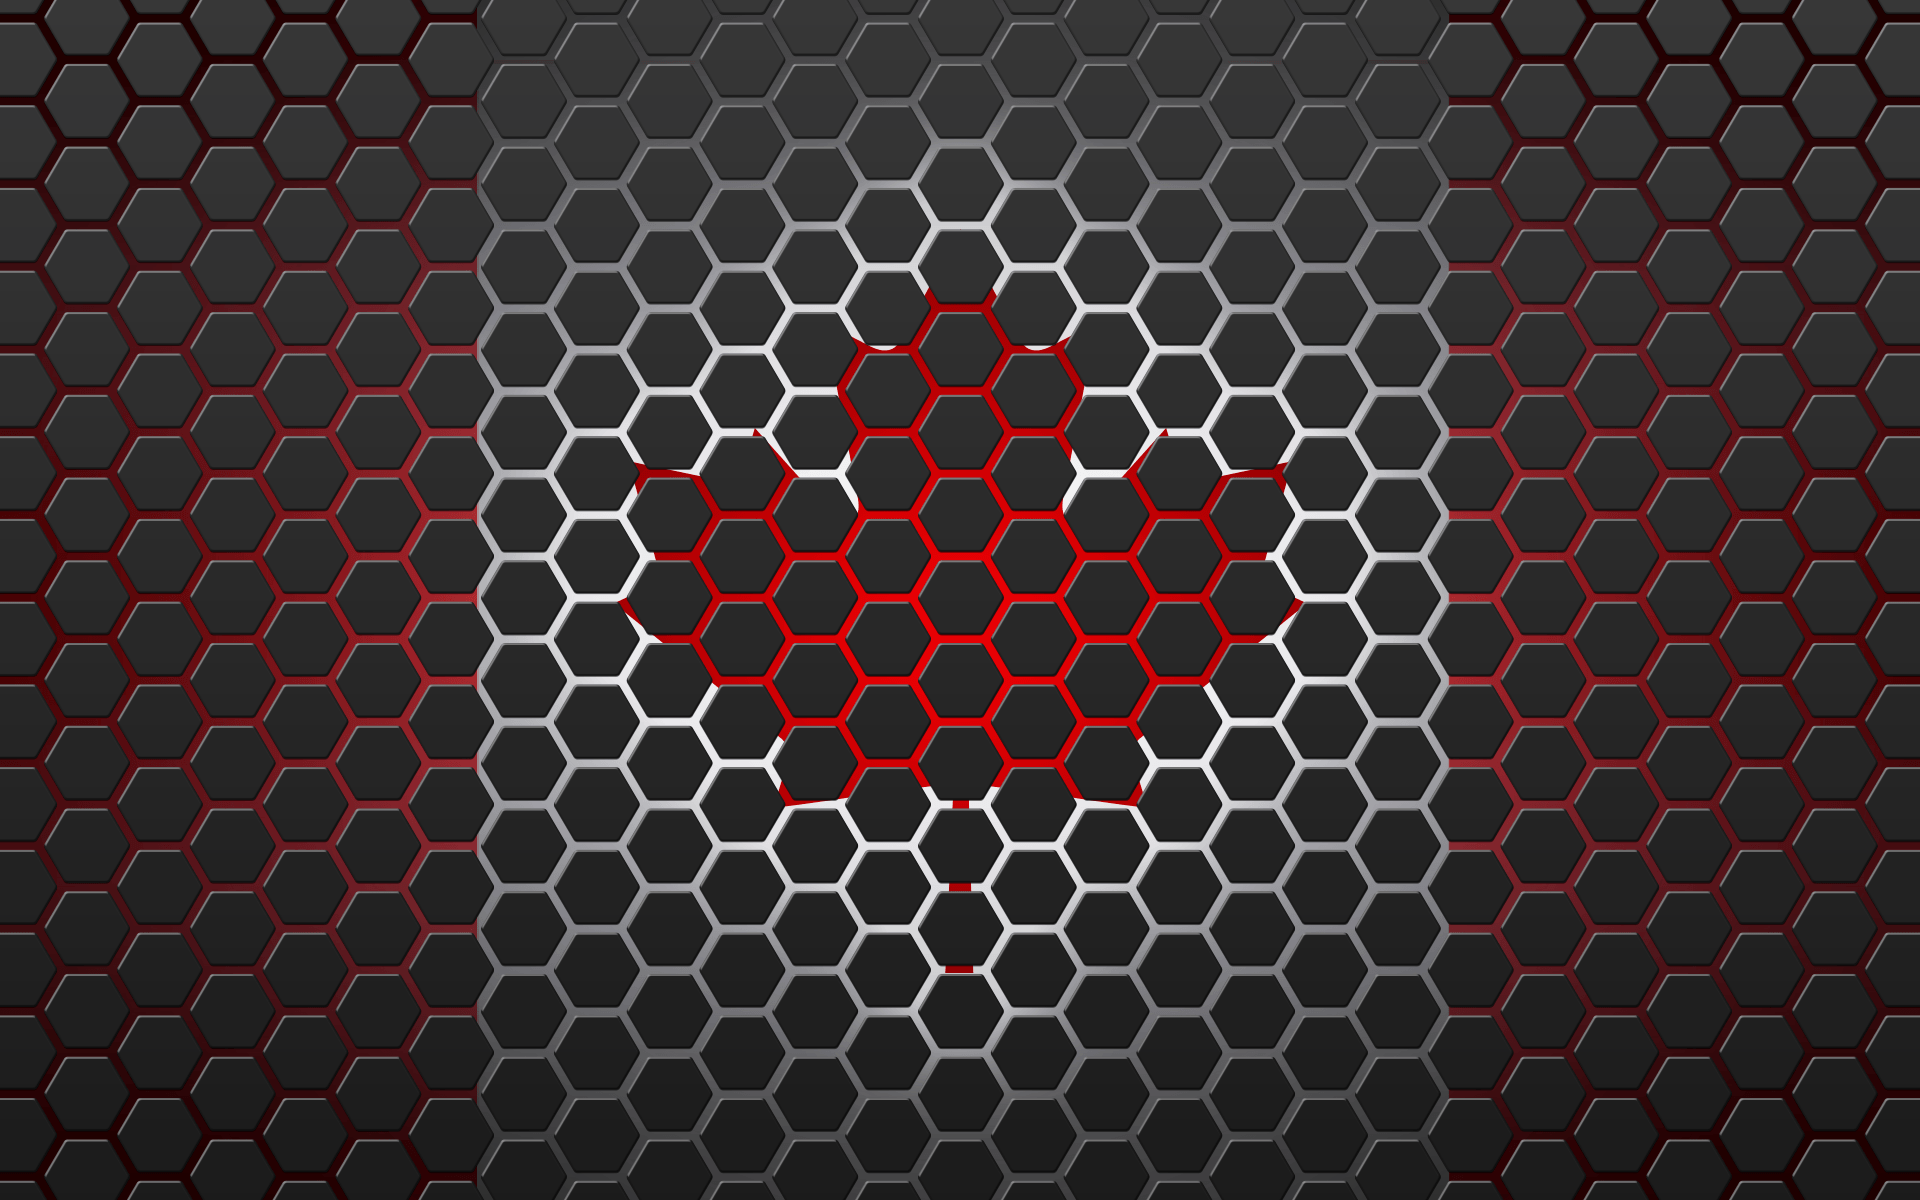 Canada Flag HEX (Hexagon) Wallpaper Full HD Wallpaper and Background